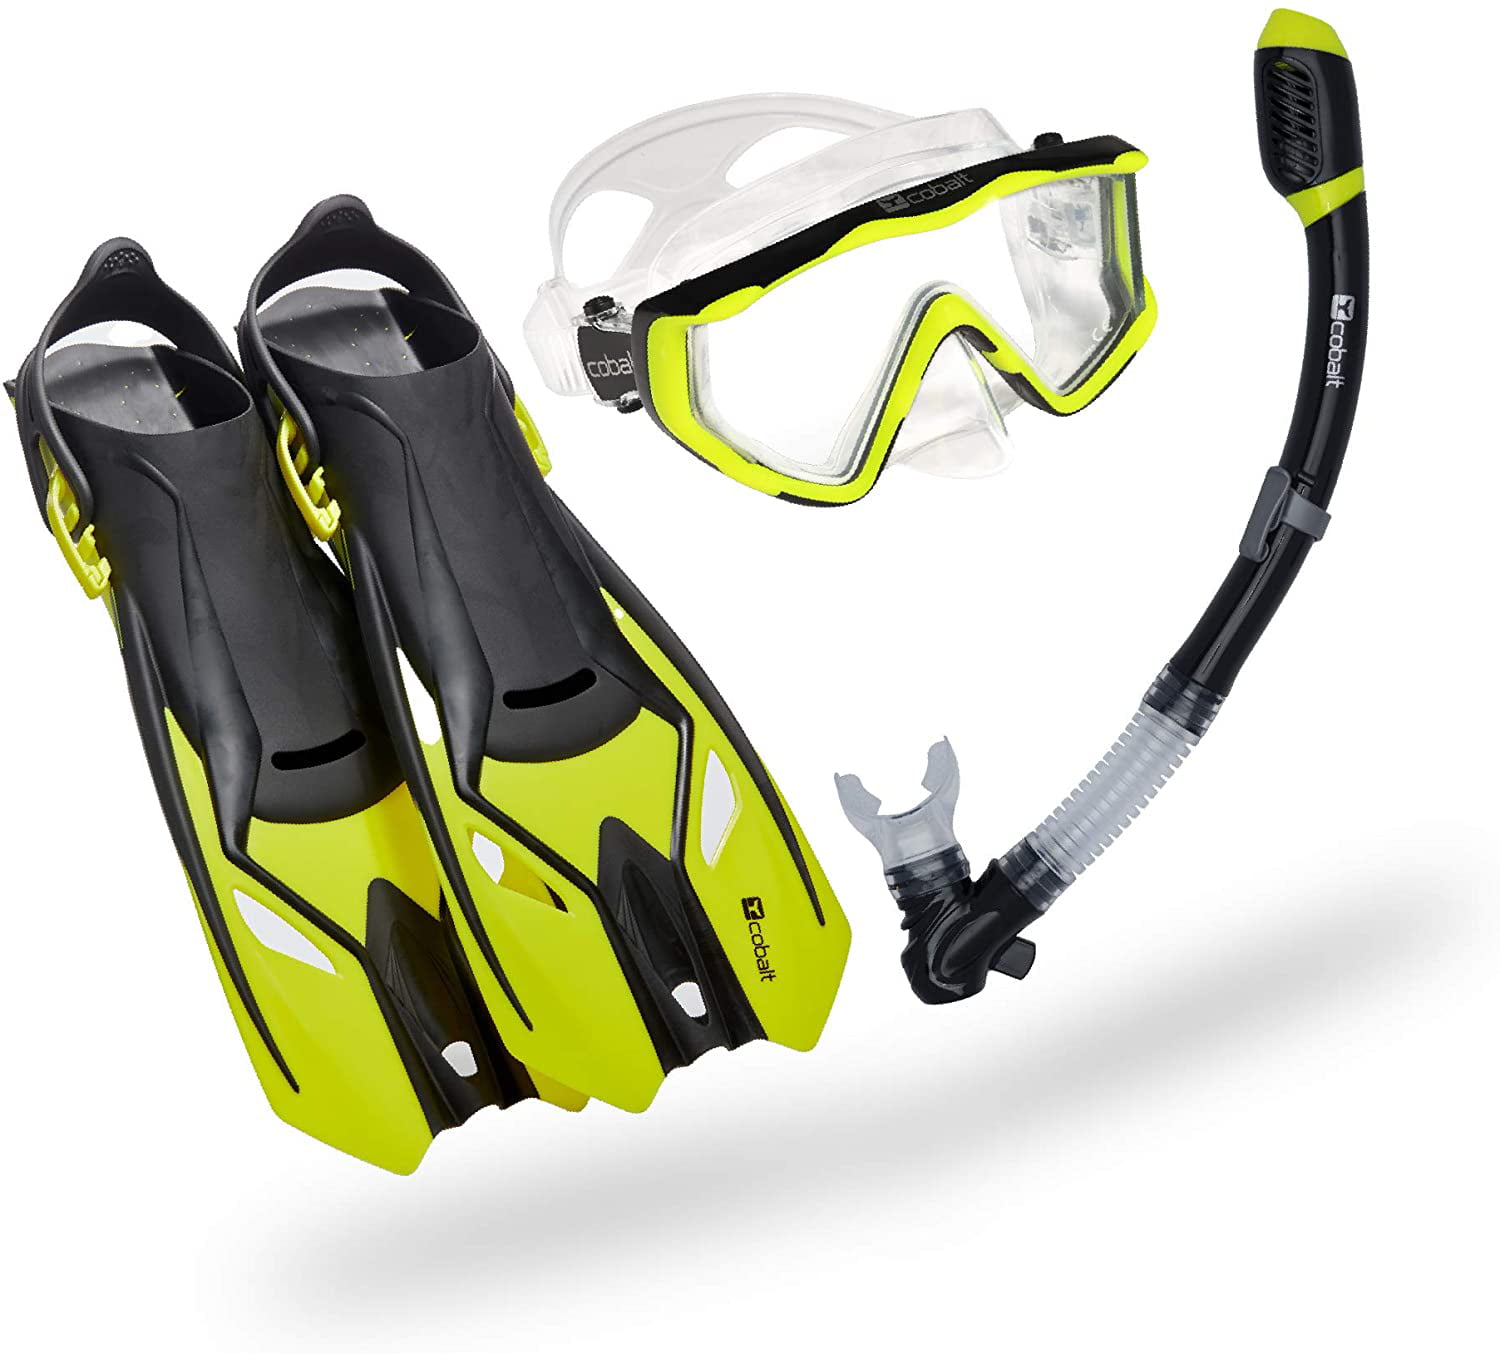 Dry Top Snorkel and Adjustable Fins for Snorkeling Wide View Mask Scuba Diving Cobalt Rincon Panoramic Snorkel Set 